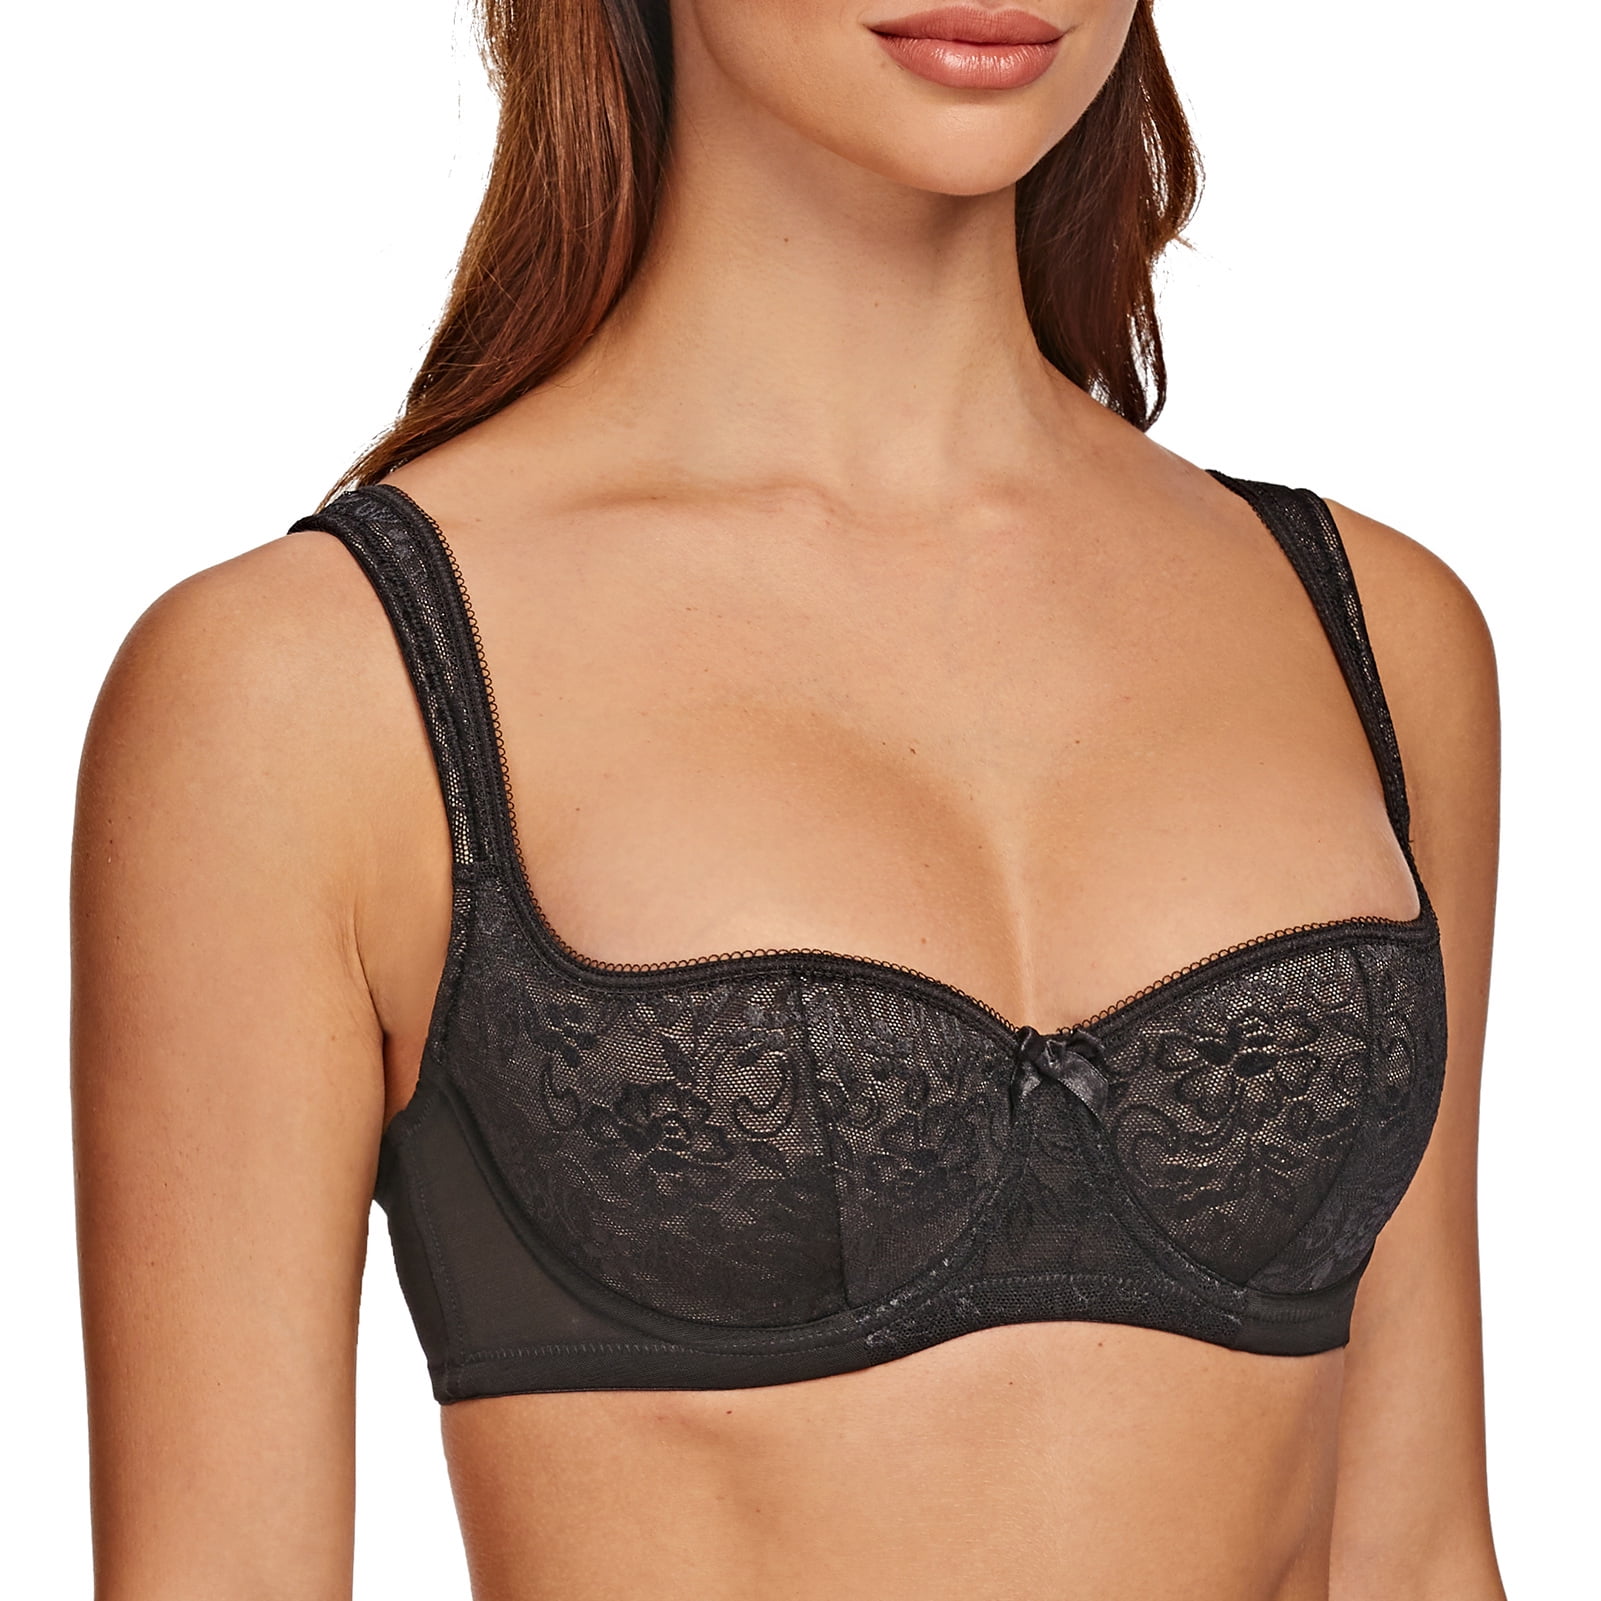 Aislor Womens Underwire Open Nipple Bra Sheer Lace Unlined Push Up